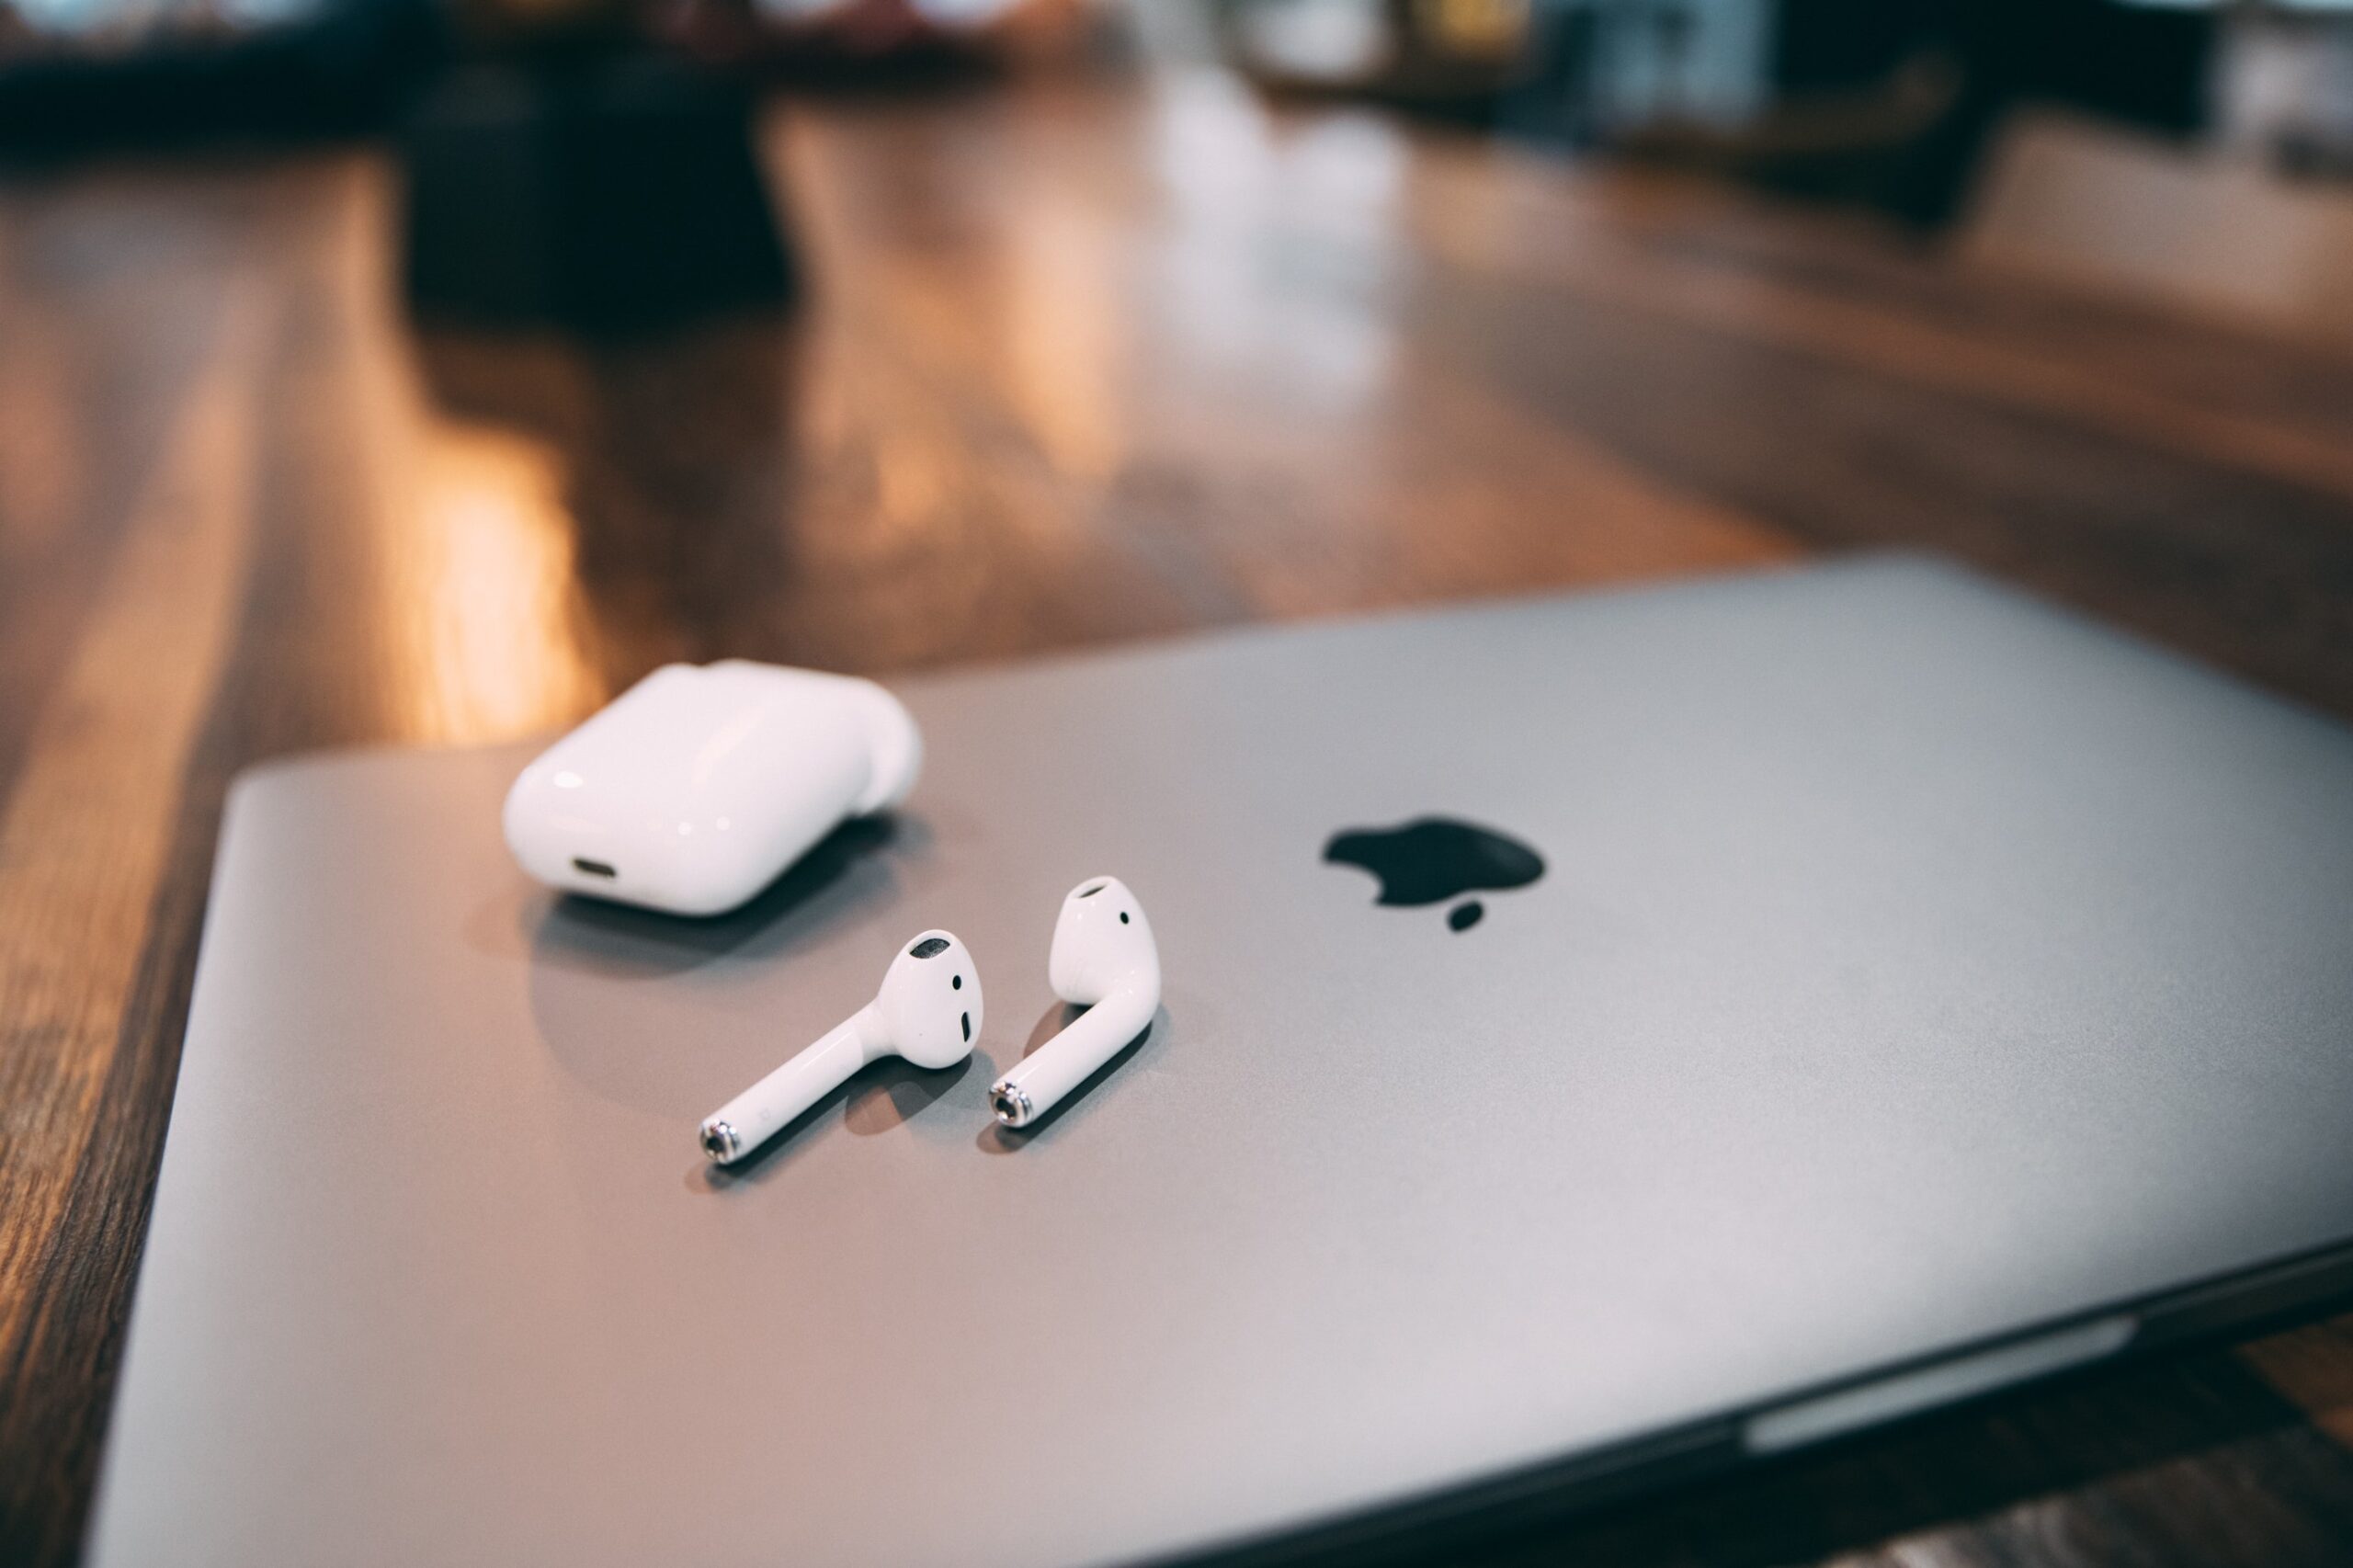 how to connect airpods to mac